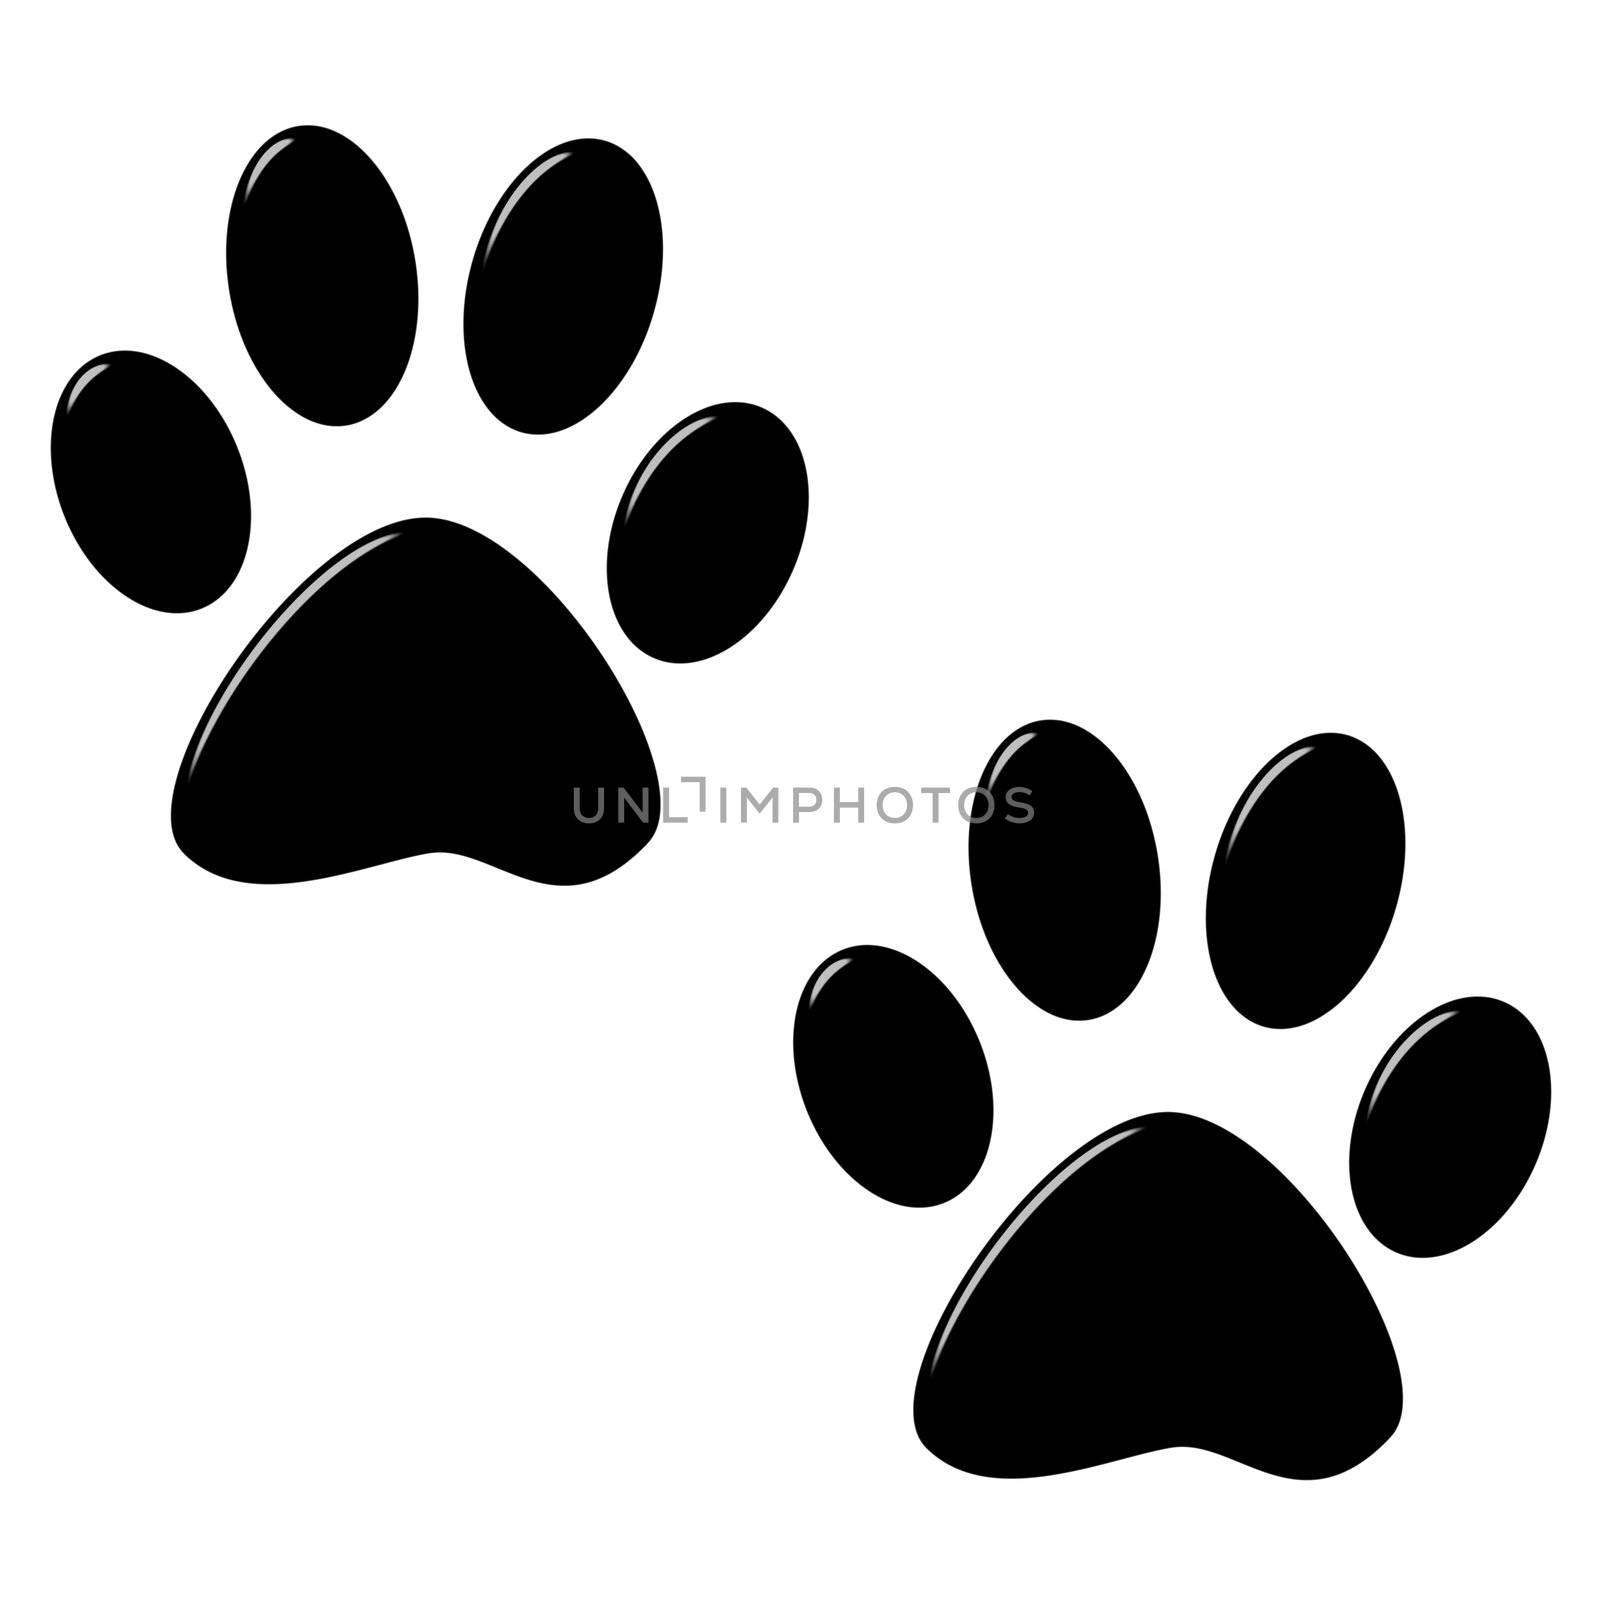 3d cat foot prints isolated in white